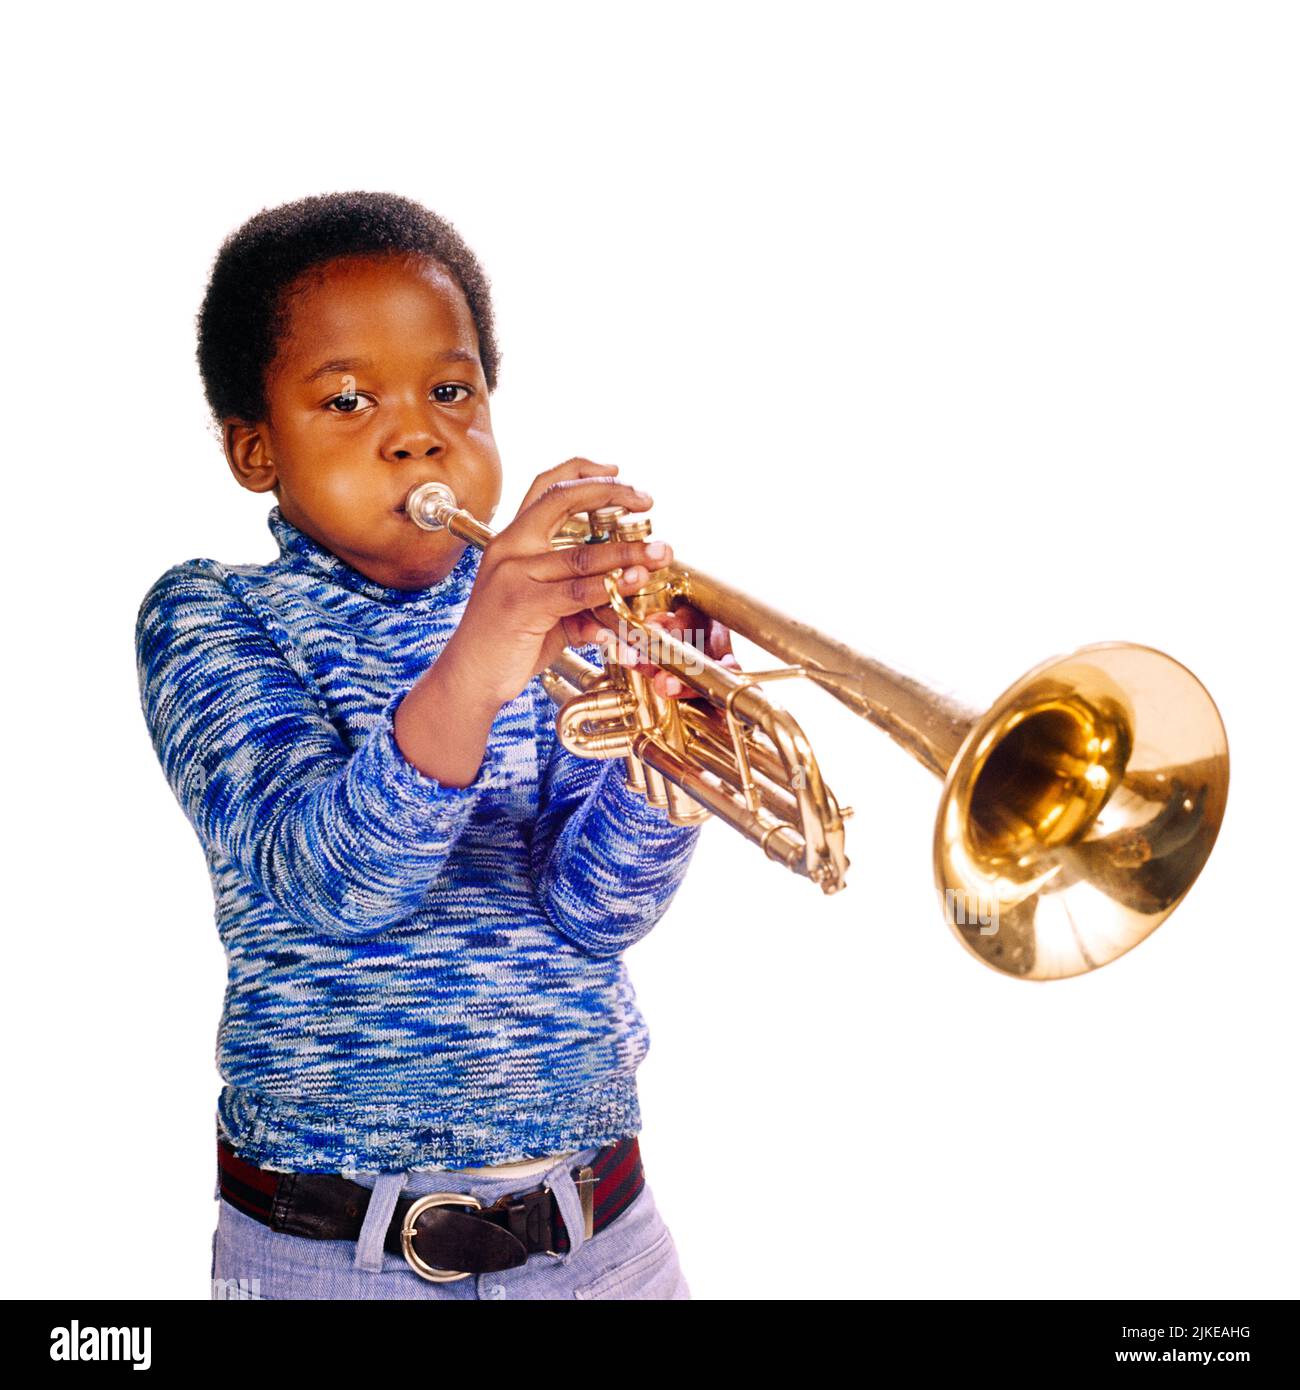 Portrait of young girl playing the trumpet Stock Photo - Alamy